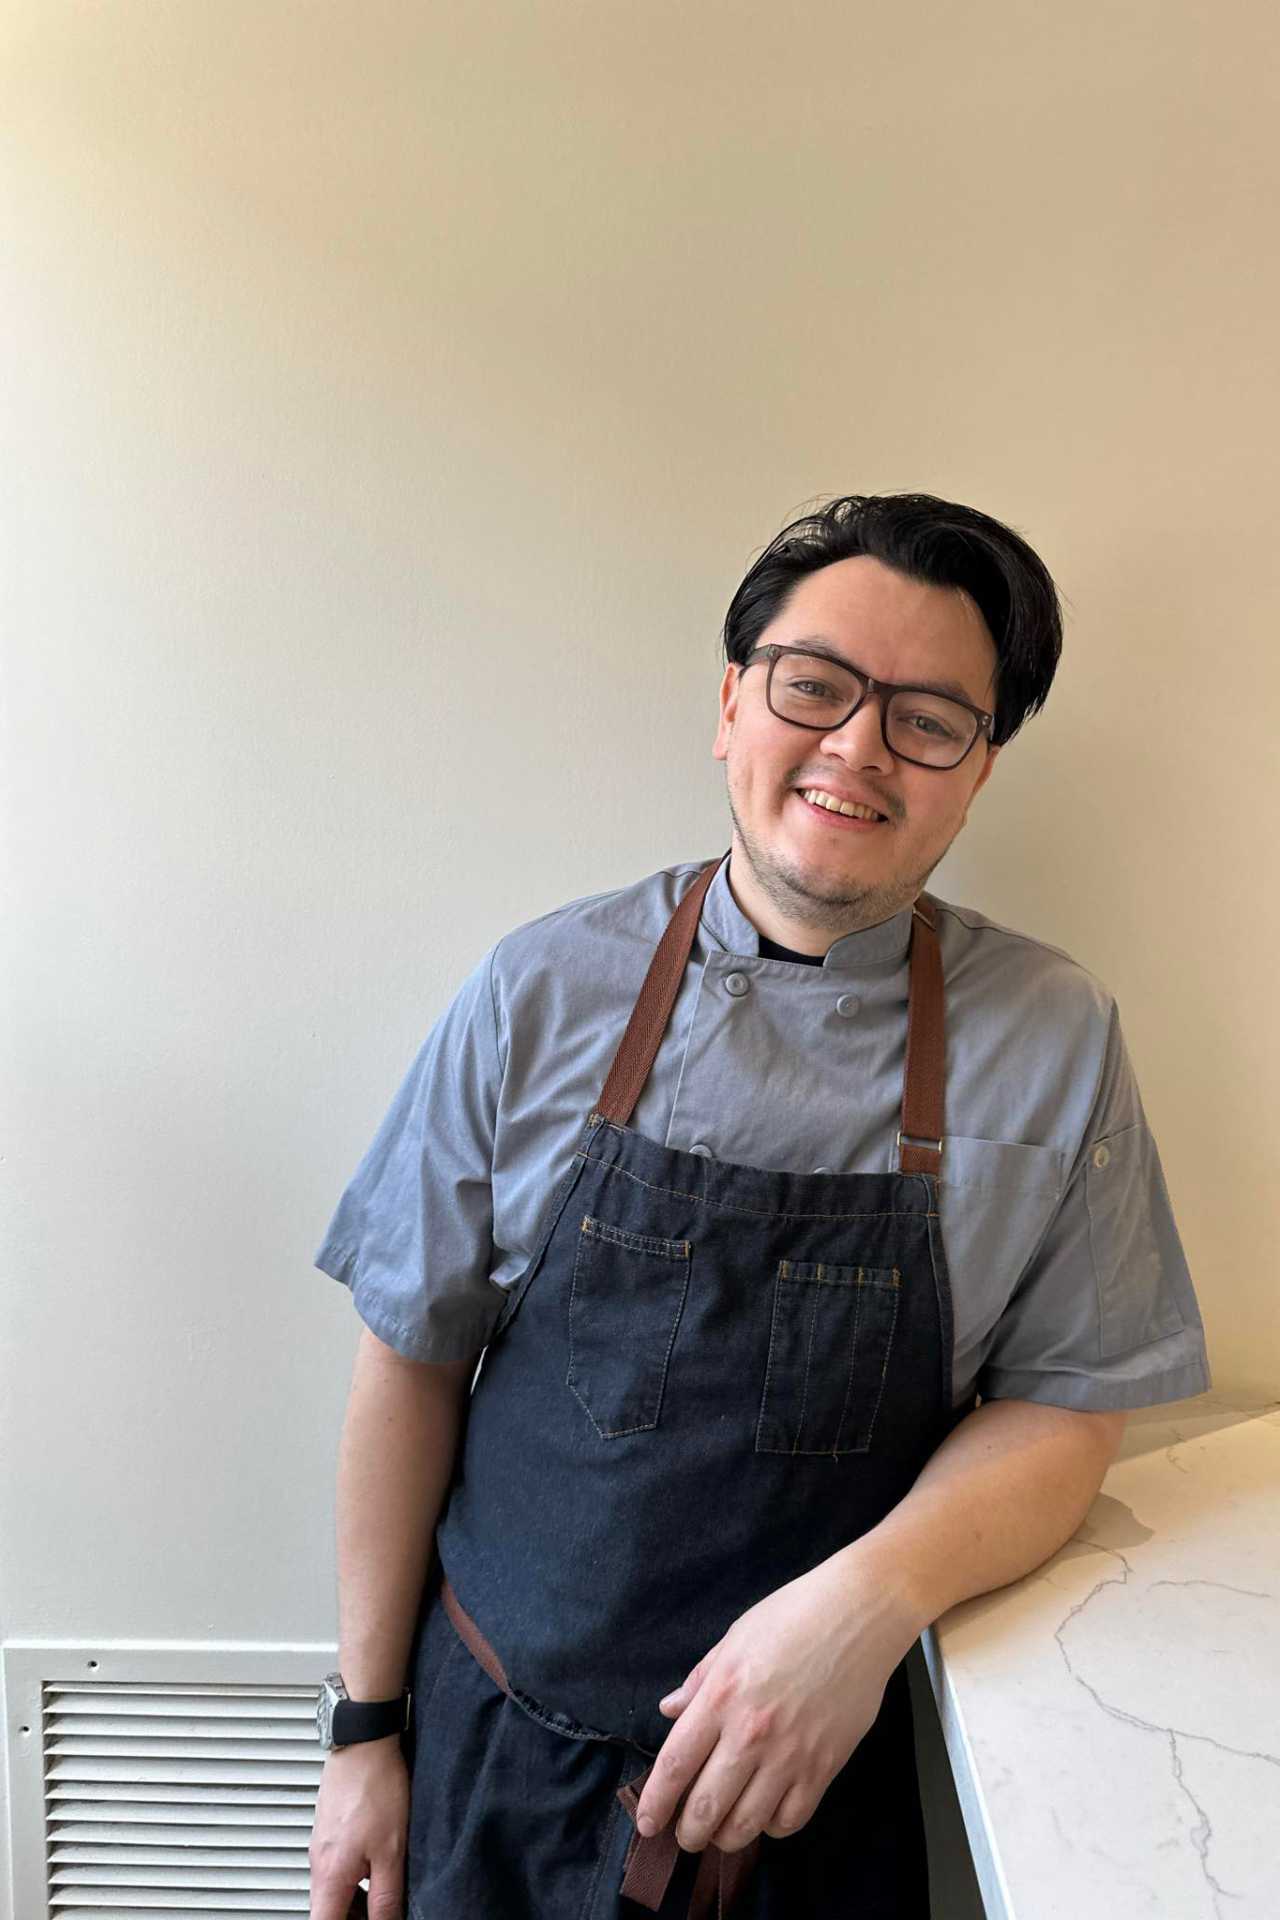 Ficoa | Chef Jerry Quintero is in charge of the menu at Ficoa